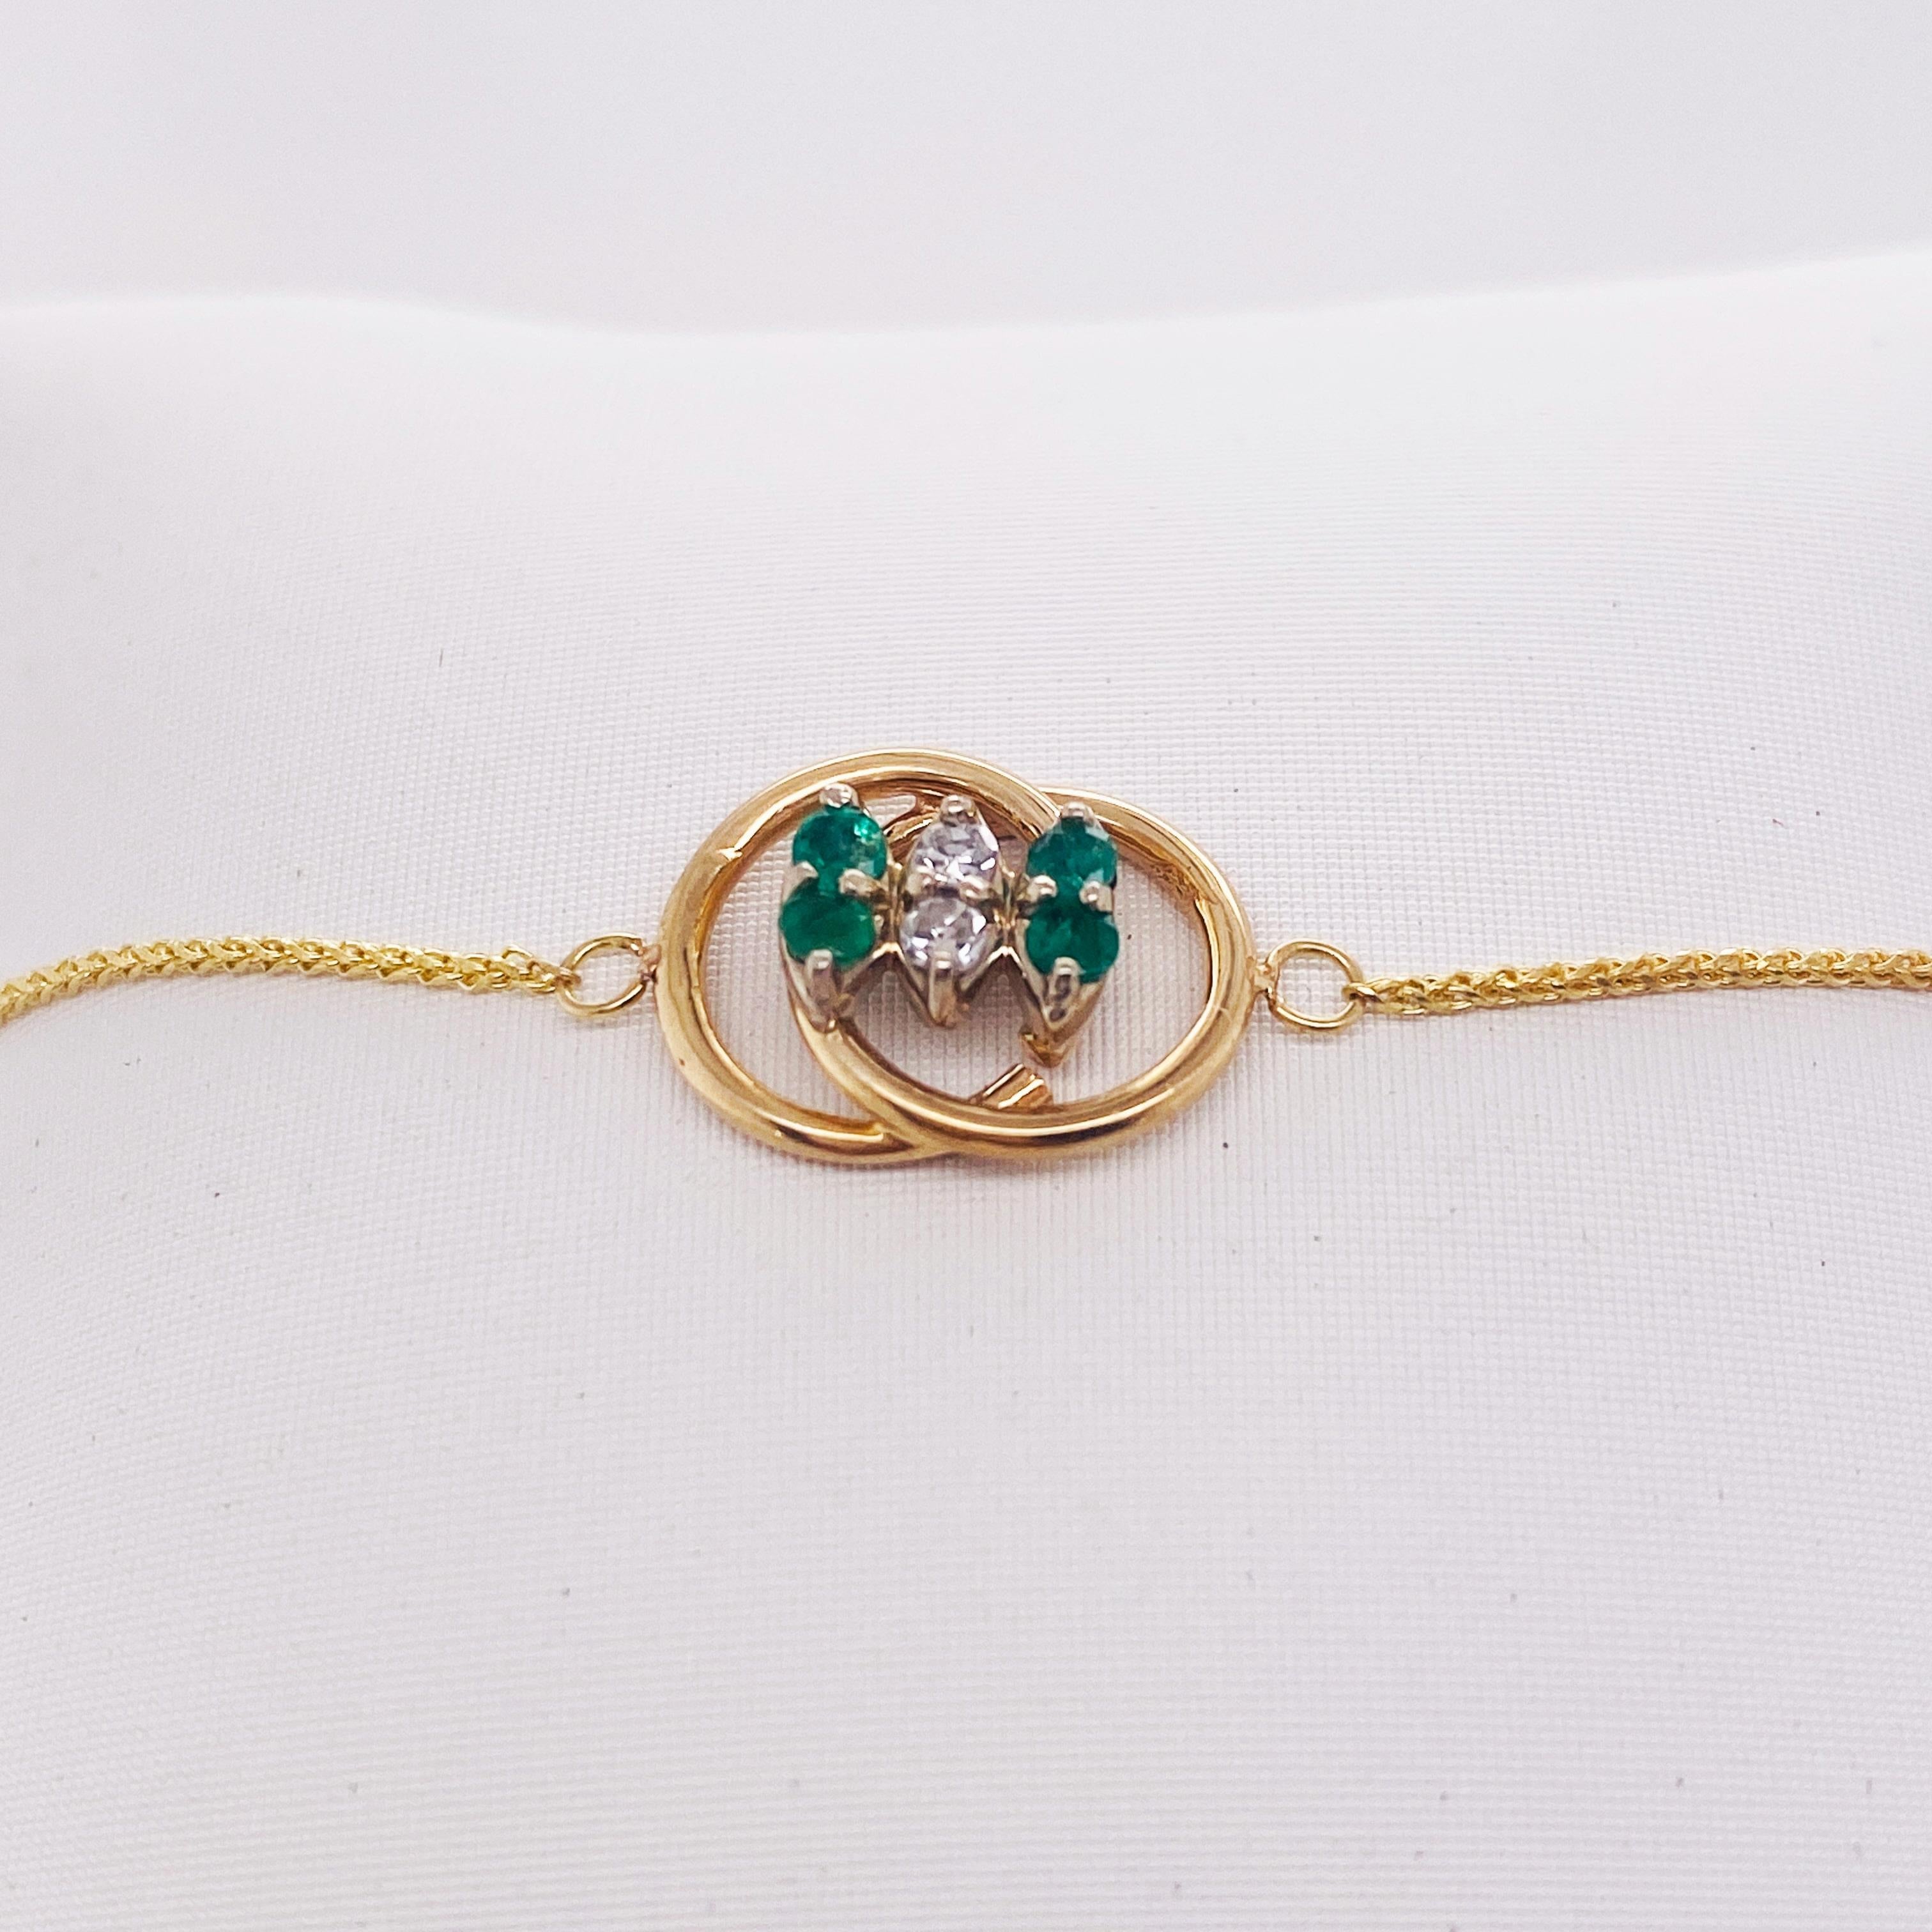 Modern Emerald Diamond Bracelet in 14k Yellow Gold One-of-a-kind Adjustable Sizing For Sale